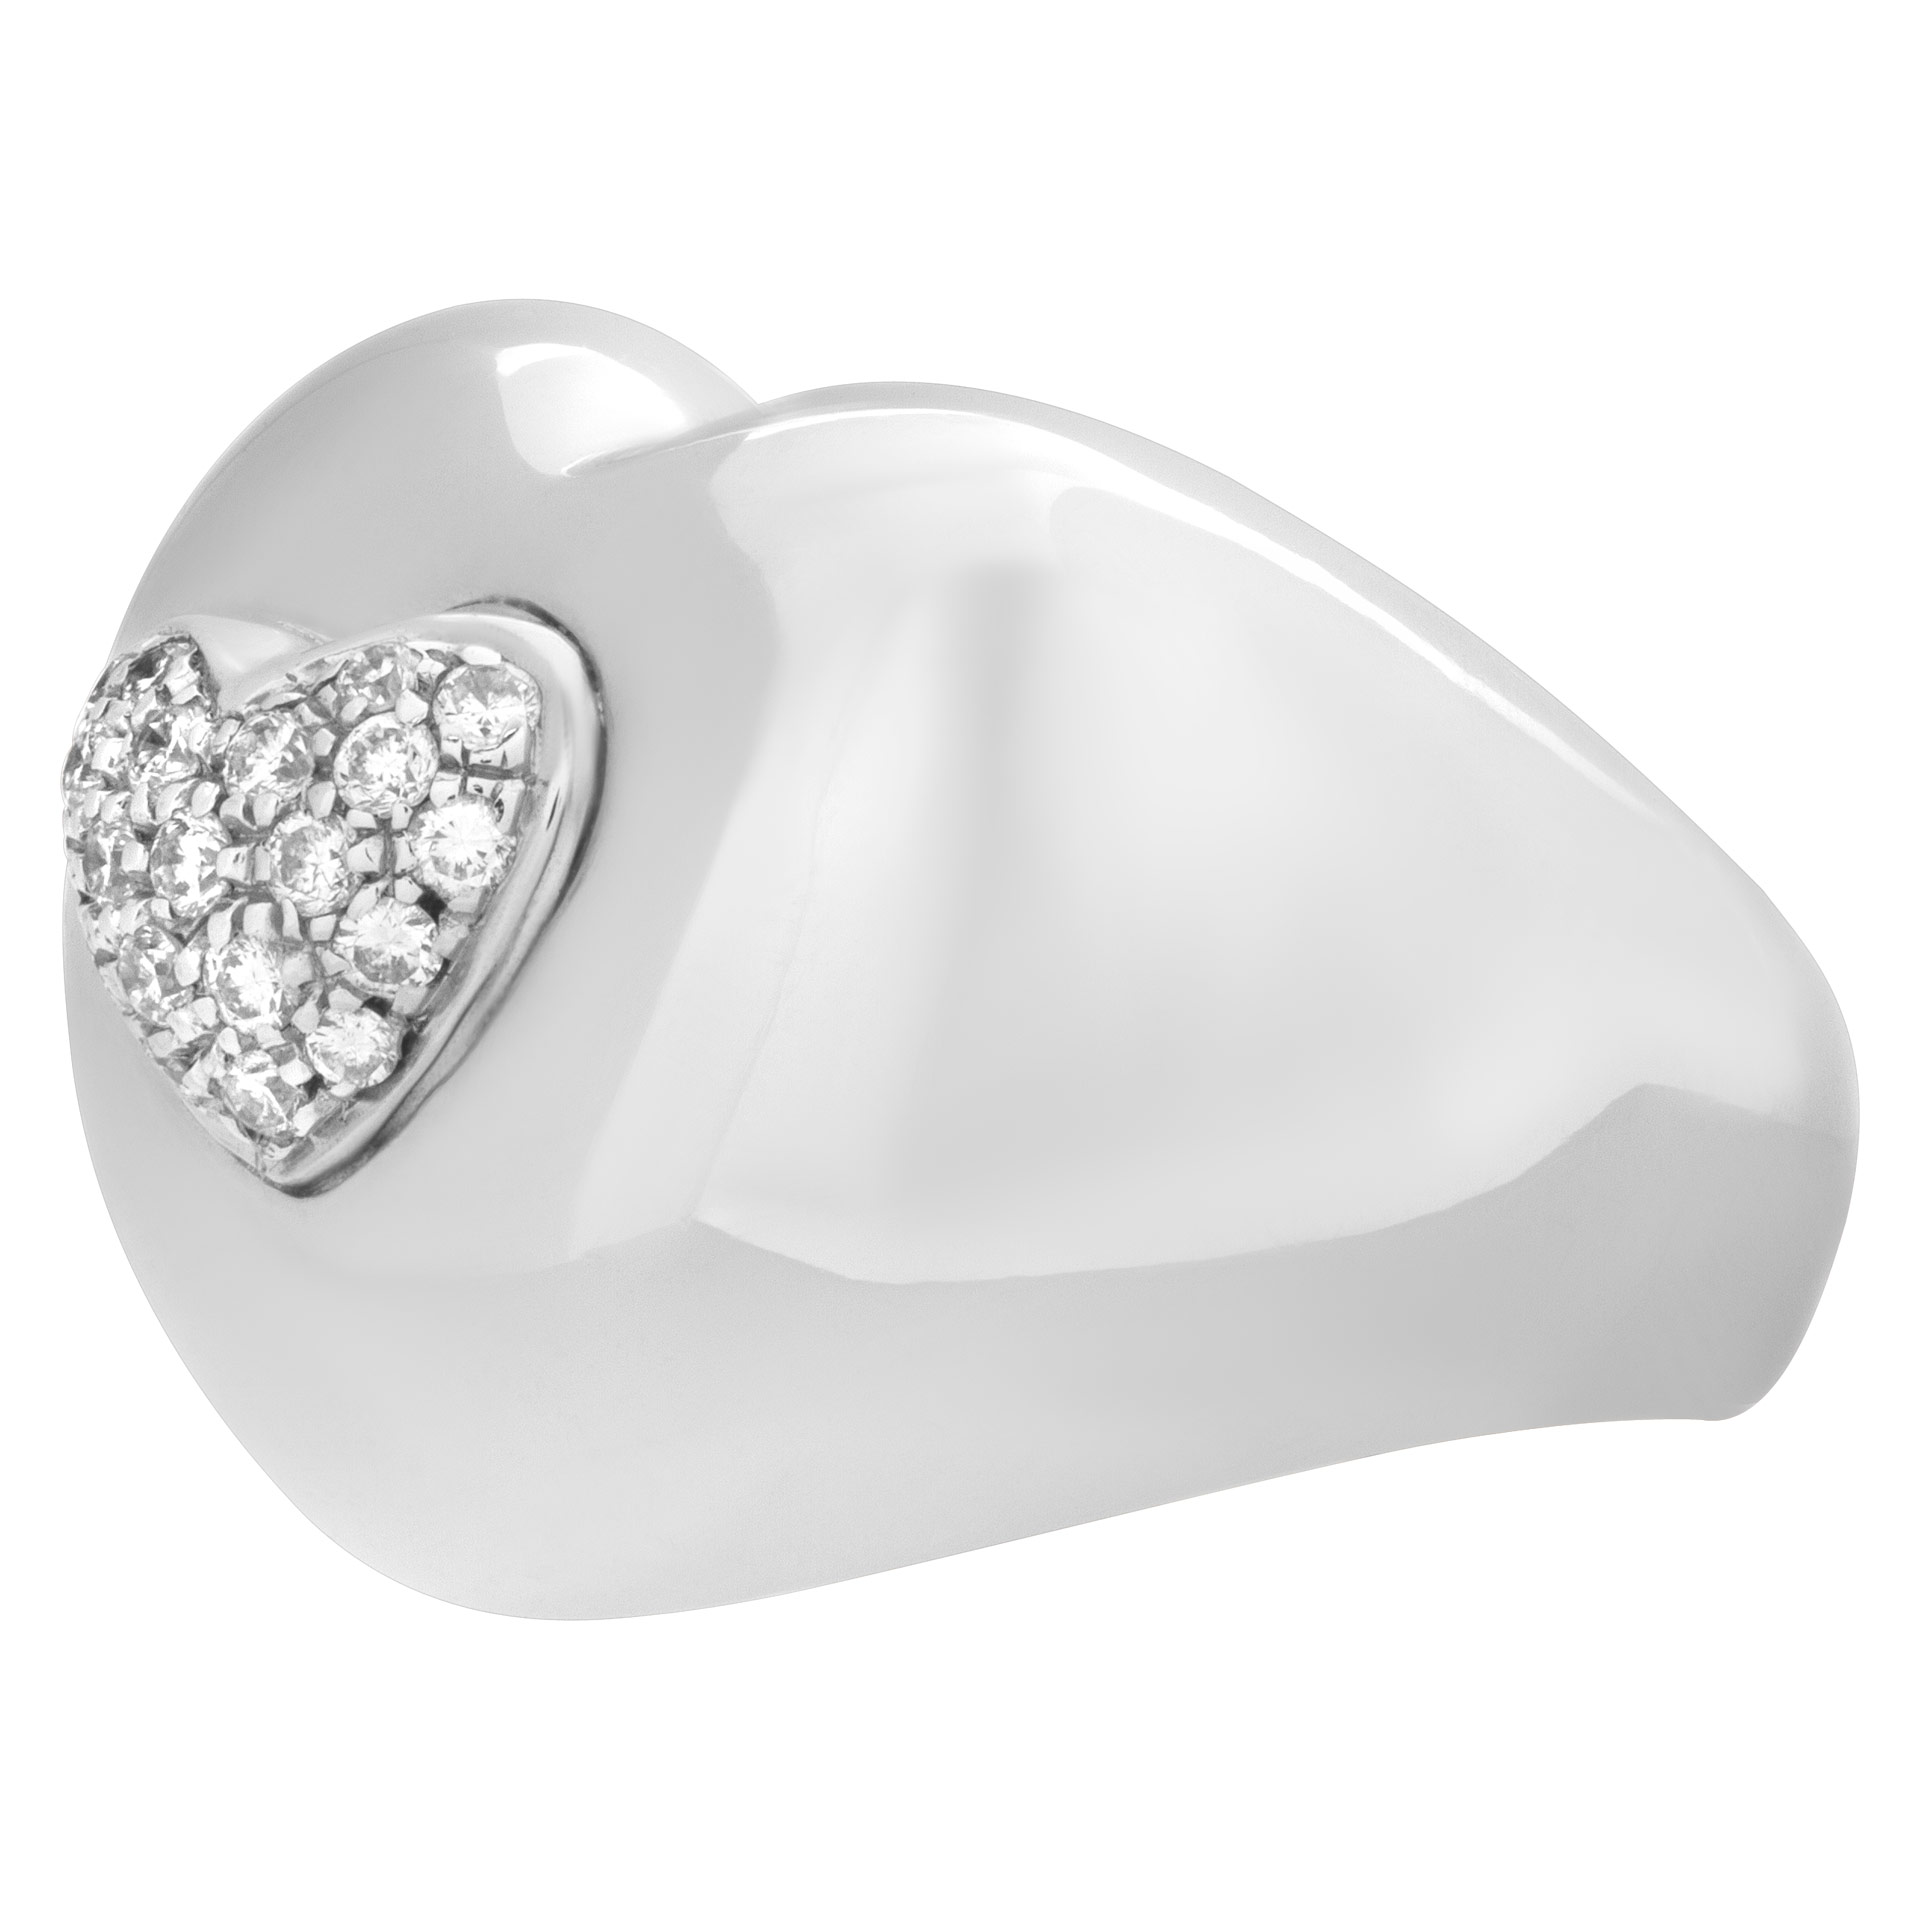 Pave diamond heart shaped ring in 18k white gold. Size 7 image 4